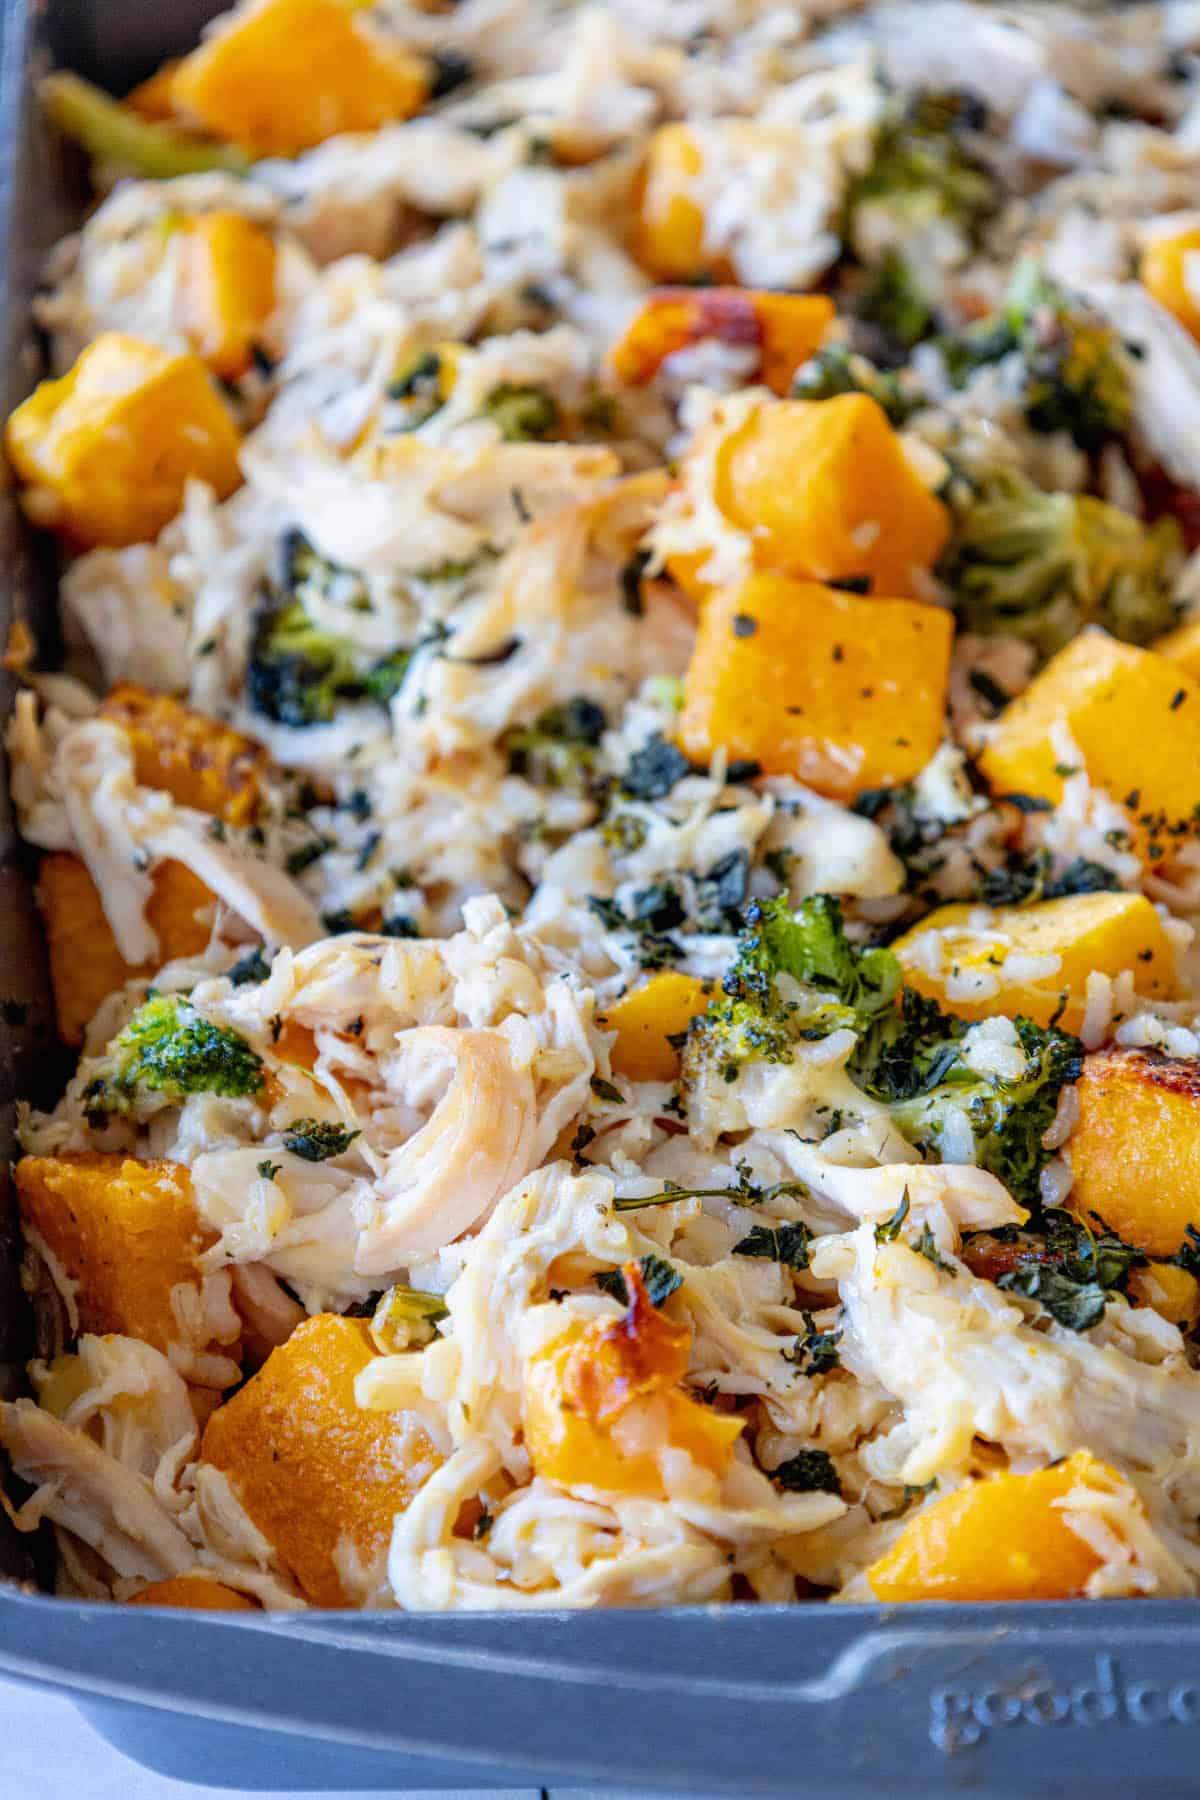 A casserole dish filled with chicken, broccoli and Butternut squash.